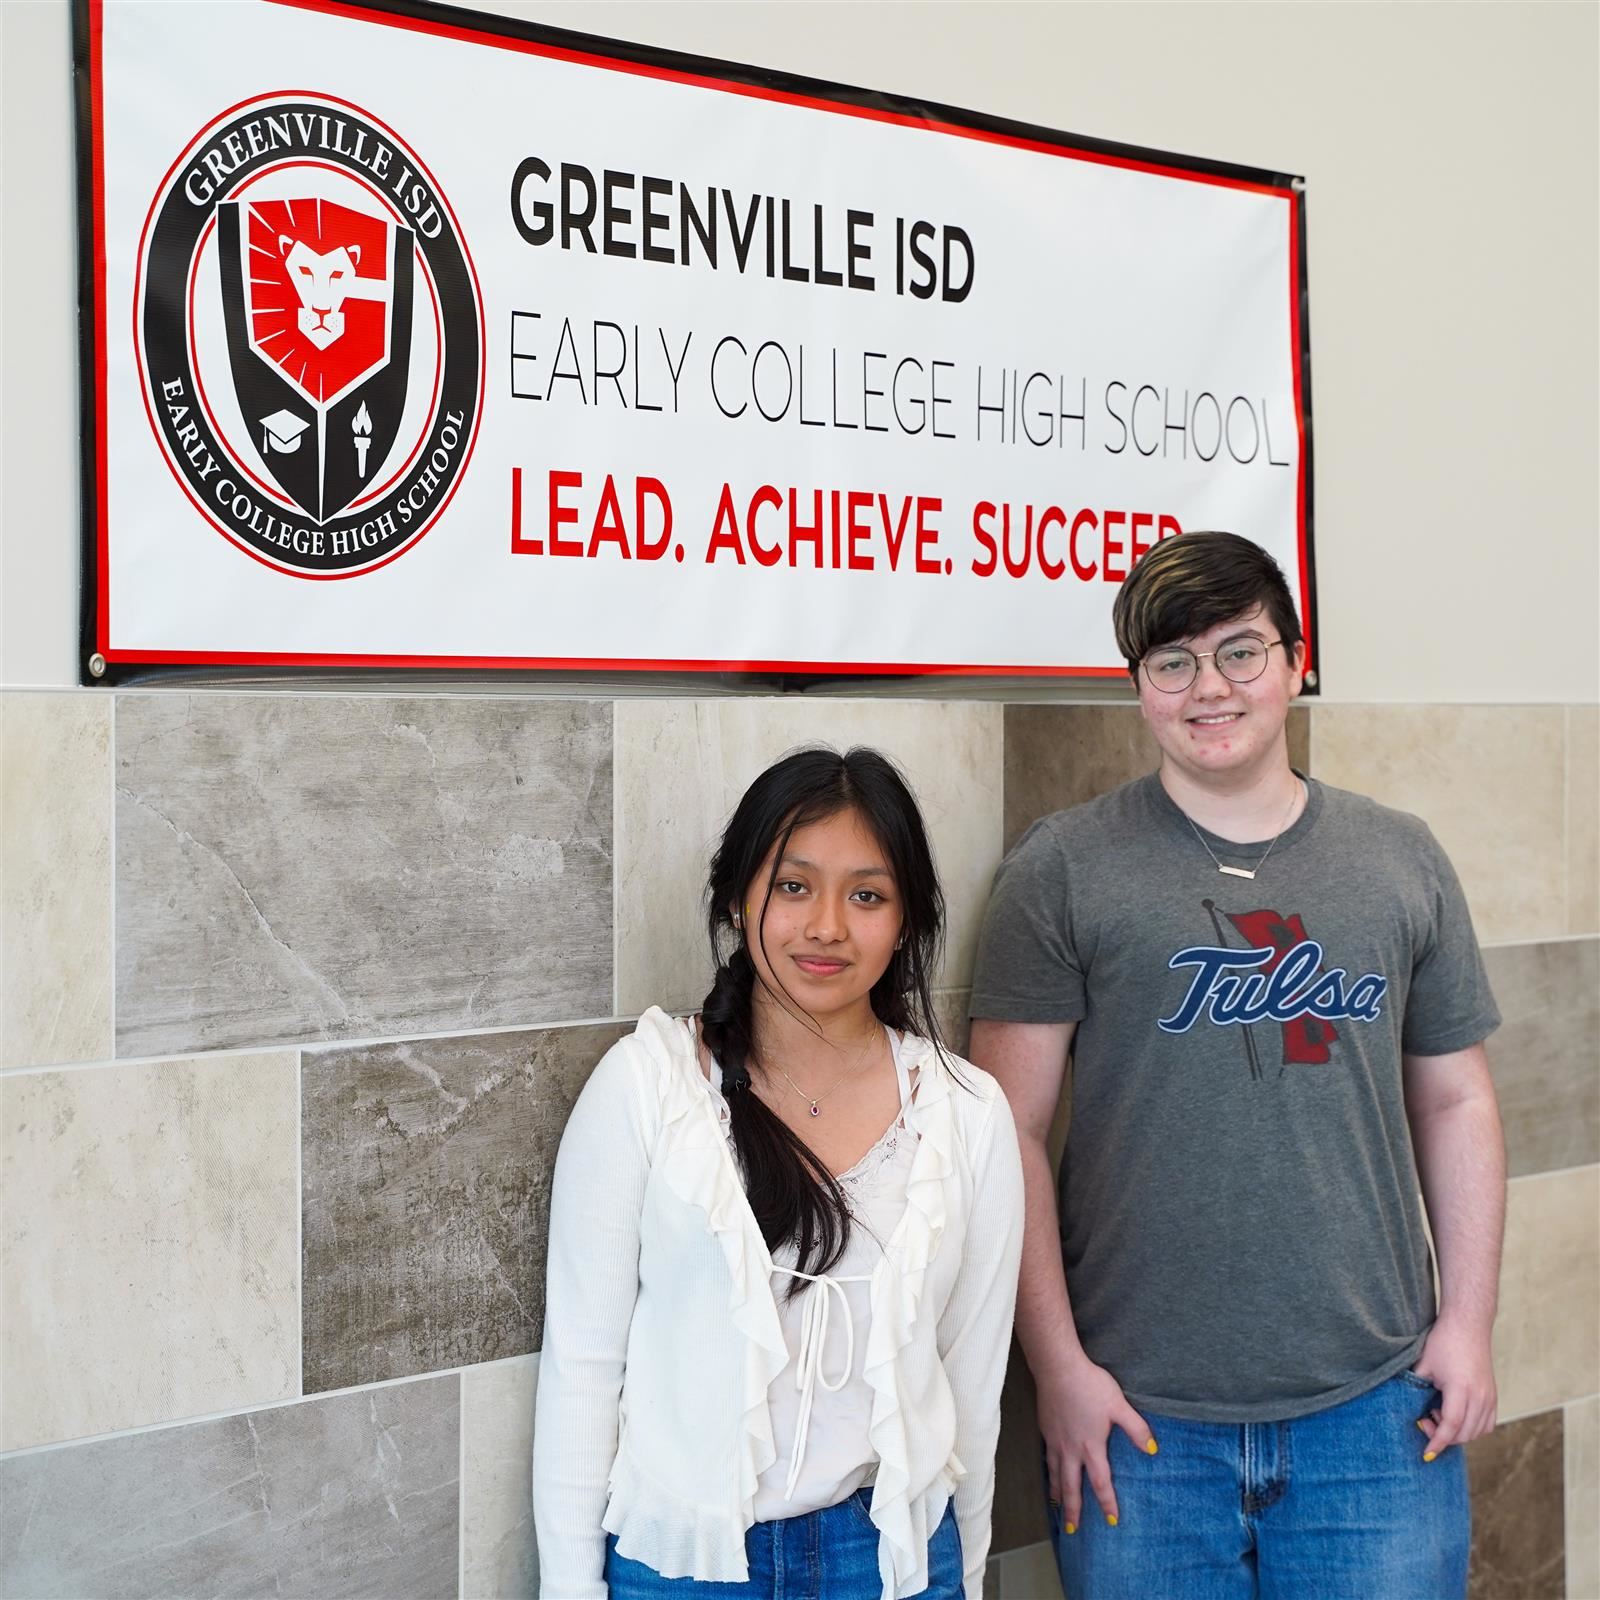  GISD's first Early College High School students make history by earning associate’s degrees